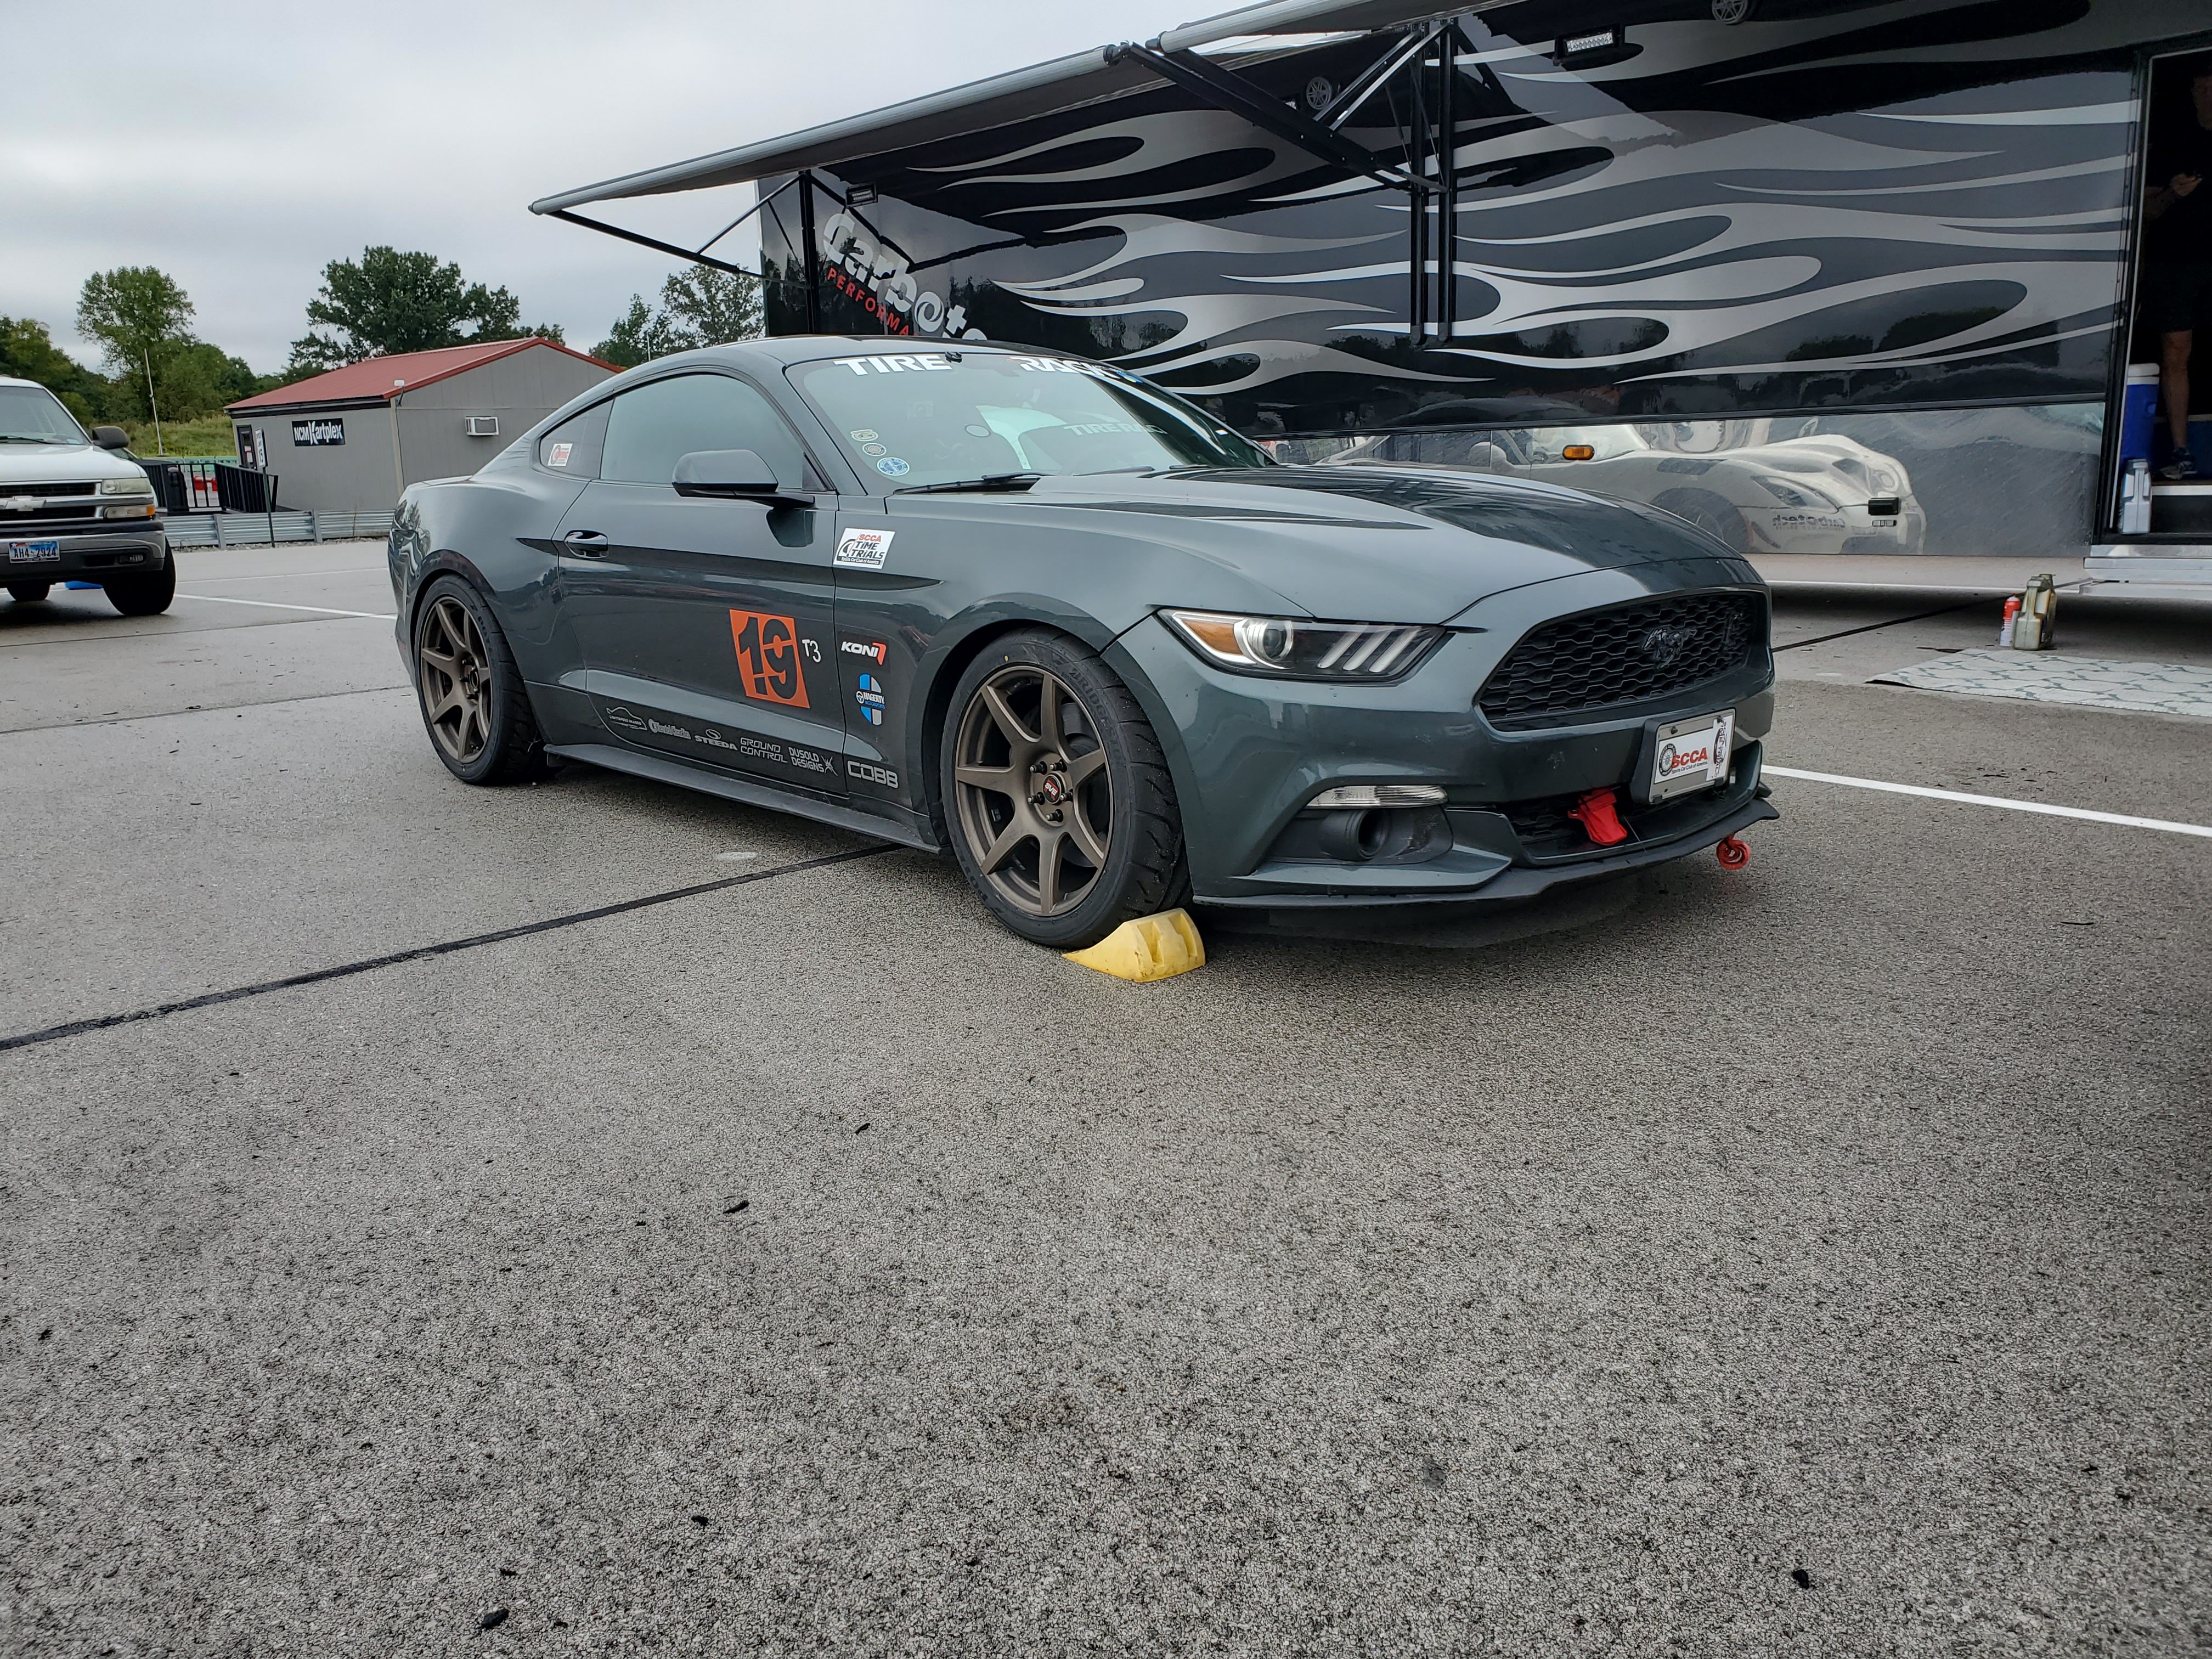 jim's 2015 Ford Mustang - Holley My Garage